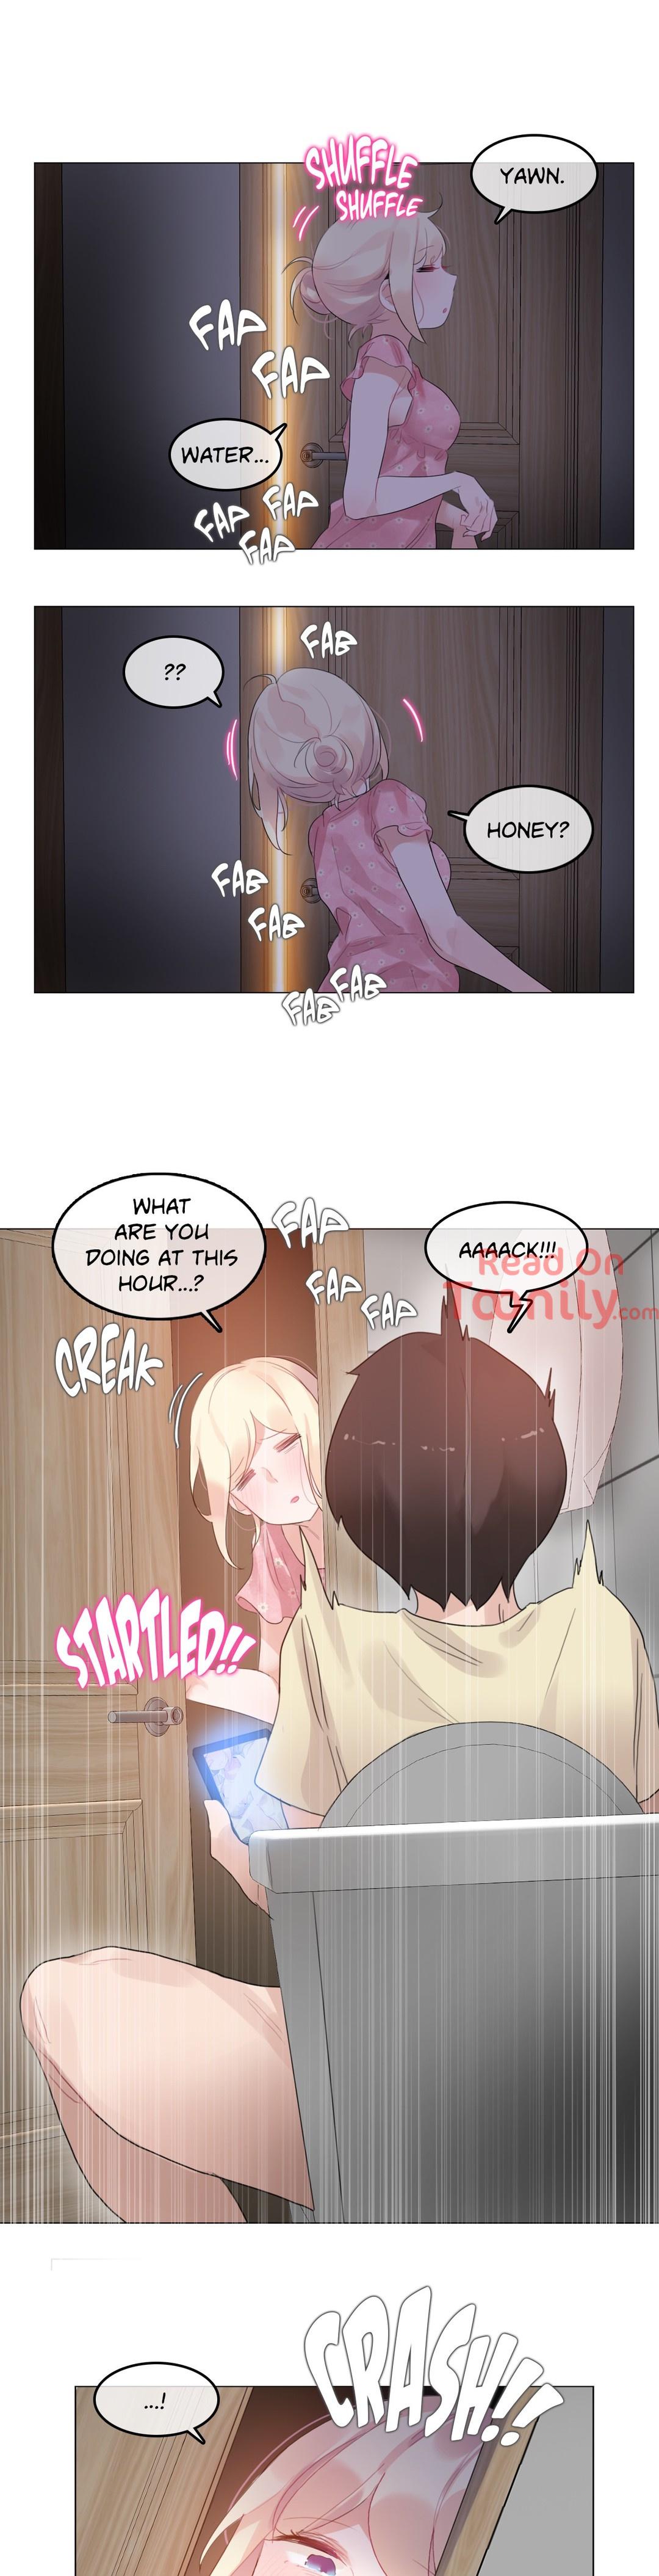 A Pervert's Daily Life • Chapter 66-70 67